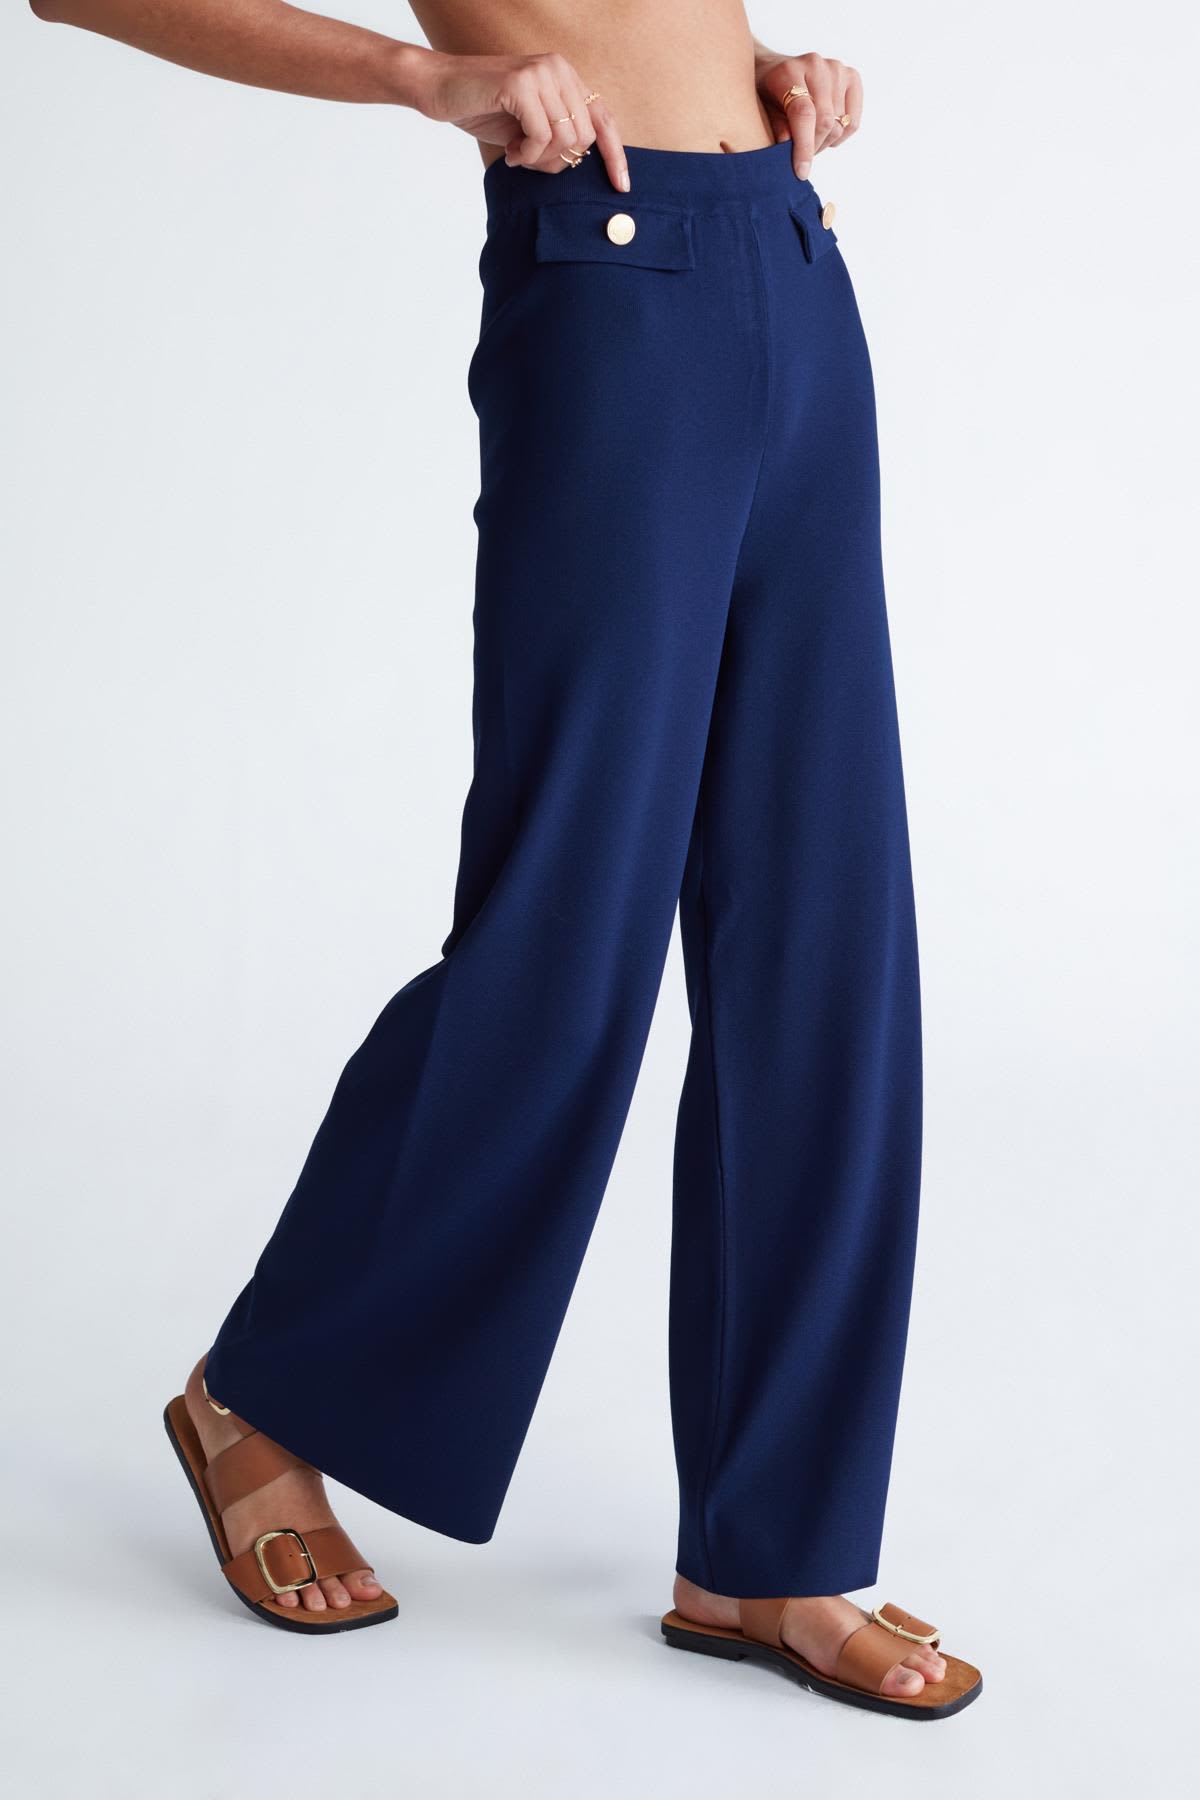 Marlene Trouser Button Detailed Knit Pants In Navy by Peraluna